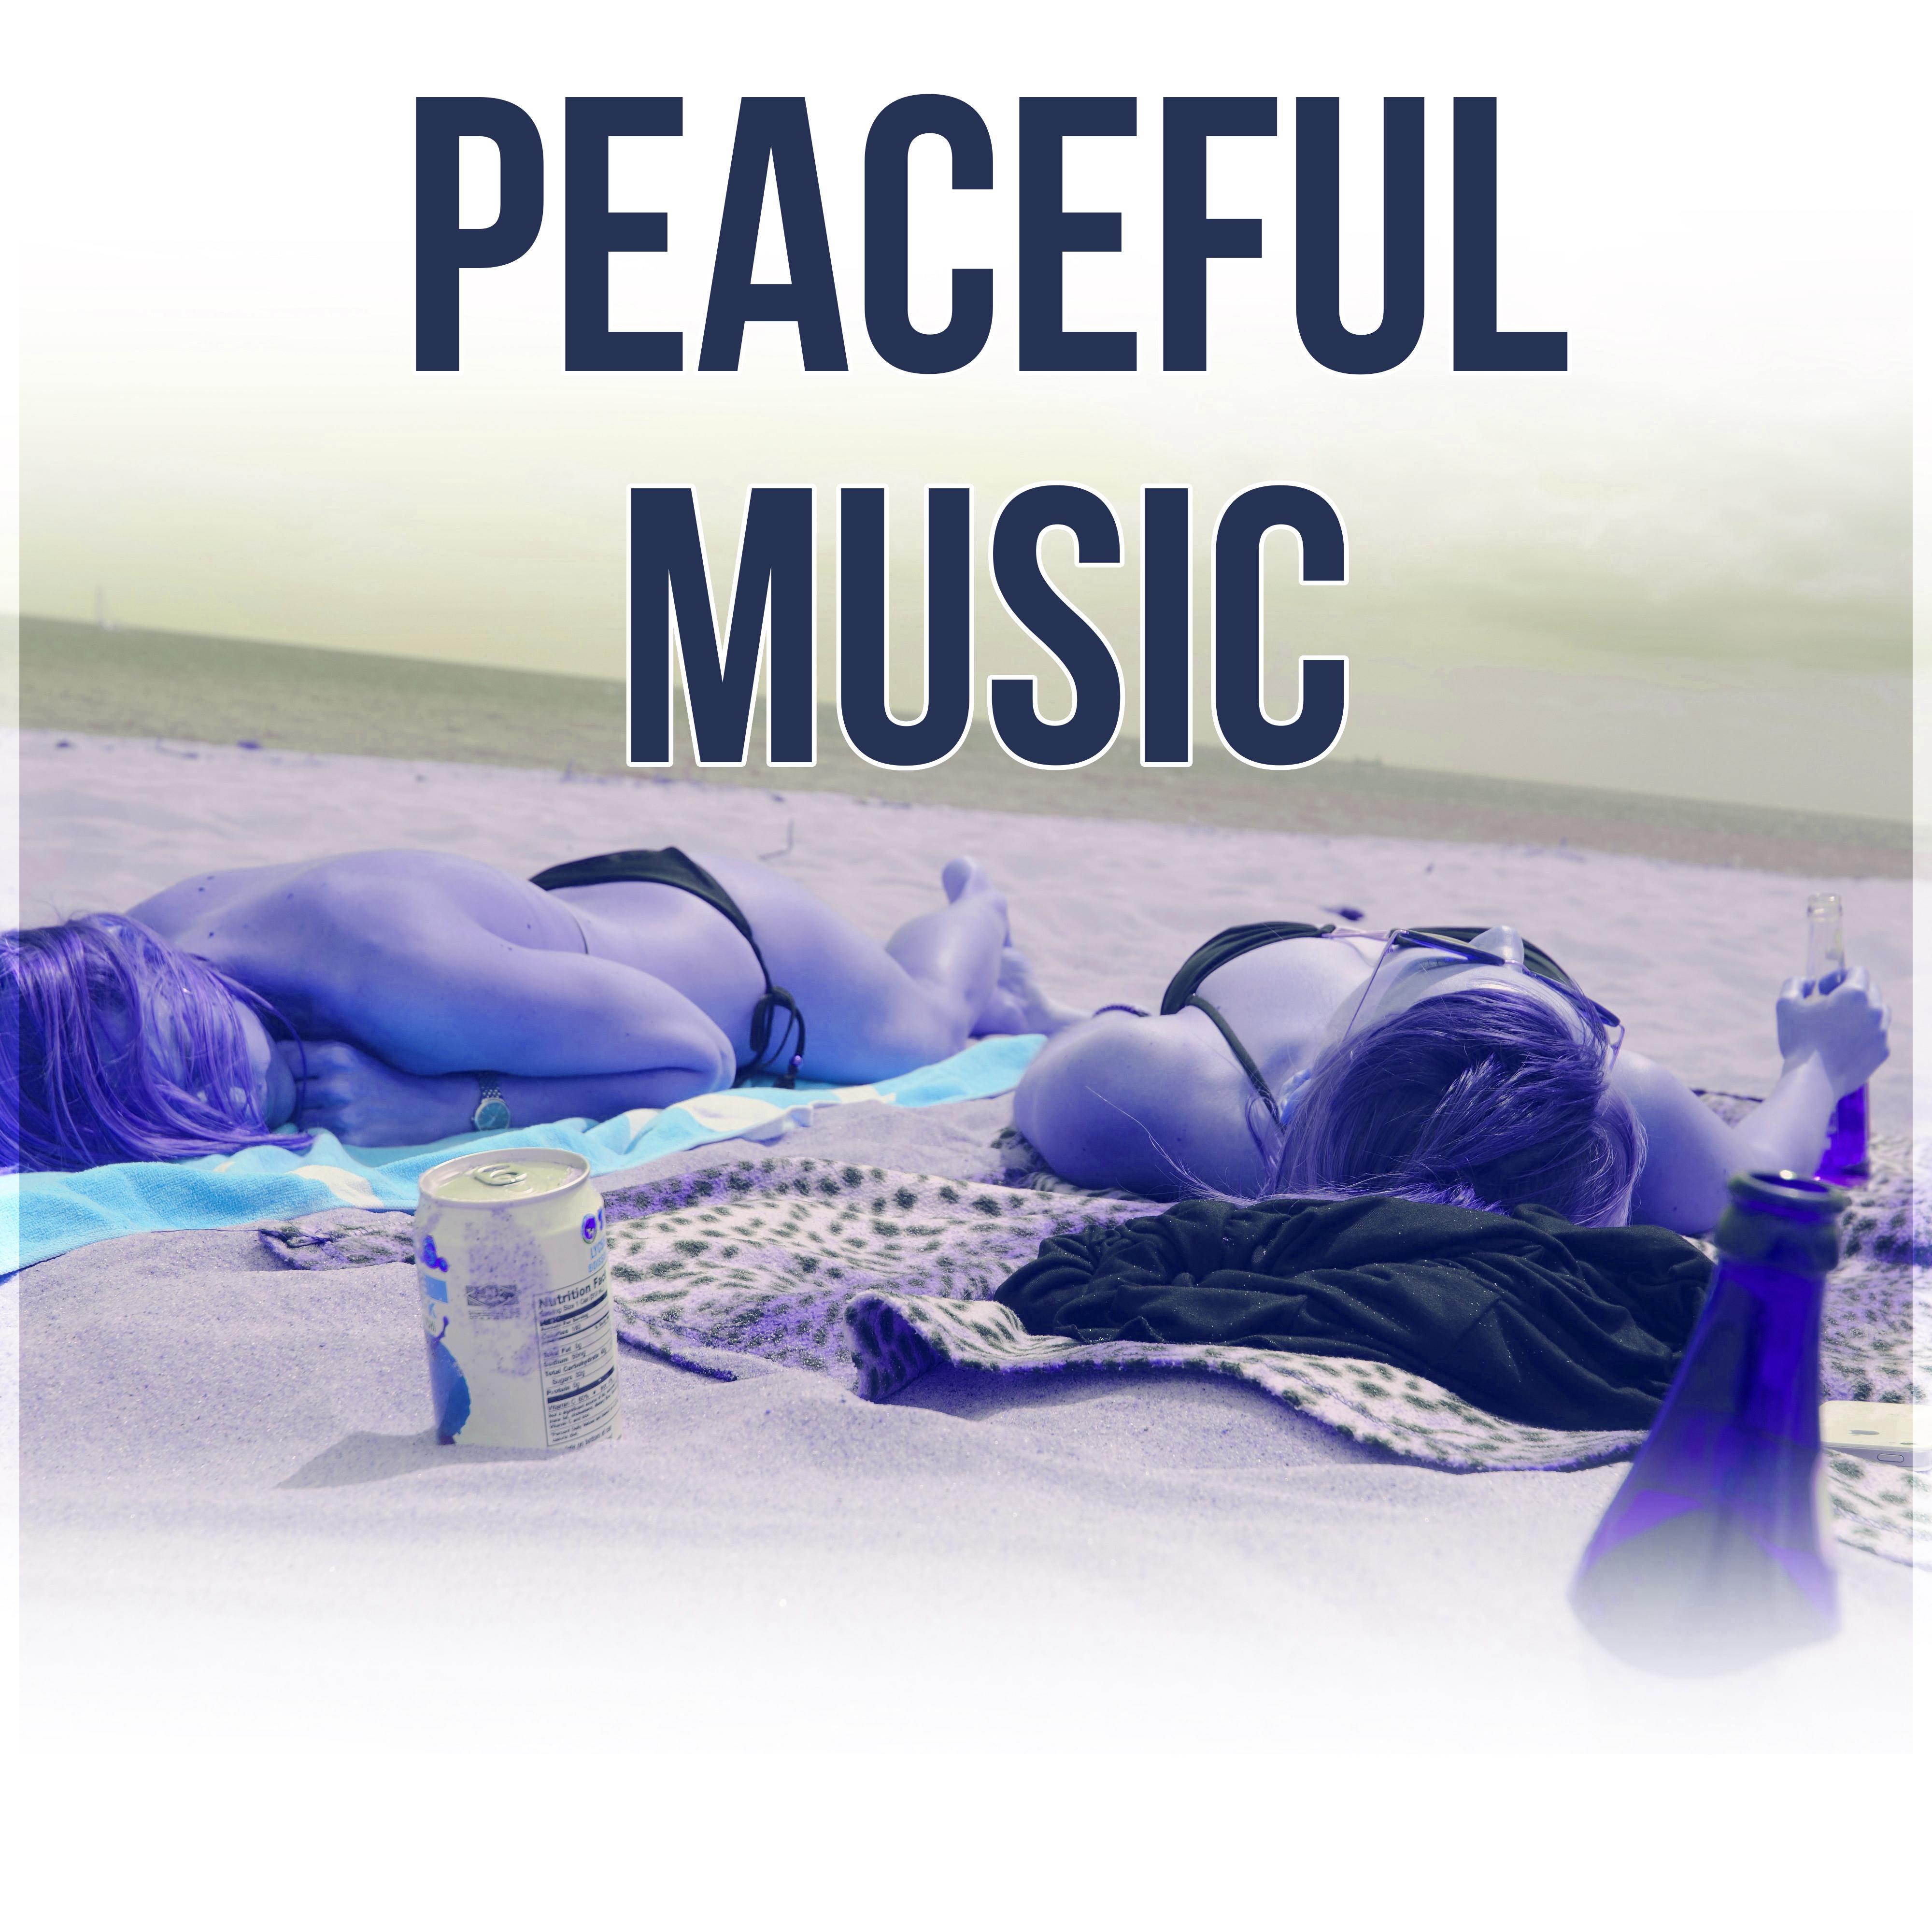 Peaceful Music - Relaxation Piano Music, Calm Piano Sounds, Sad Piano Music, Amazing Sounds with Piano